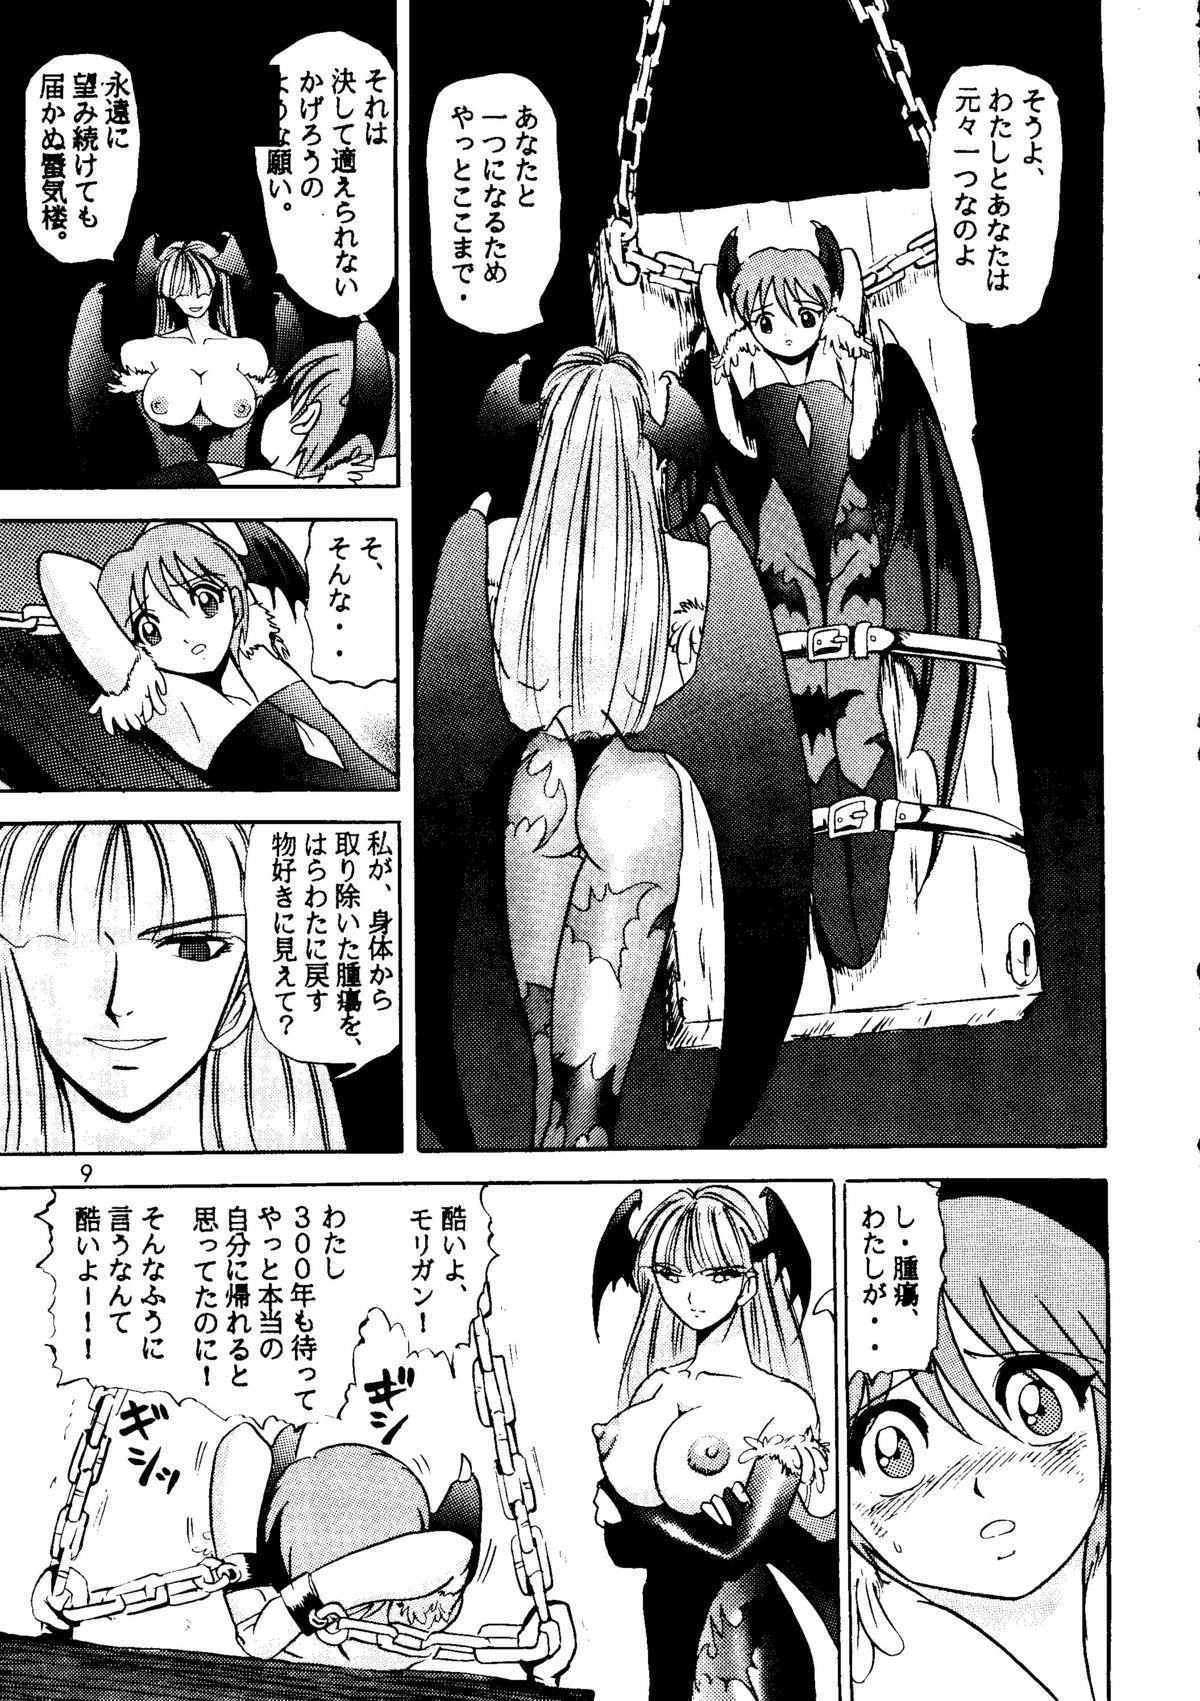 Massages Lilith Muzan - The Way of the Morrigan - Darkstalkers Sesso - Page 8